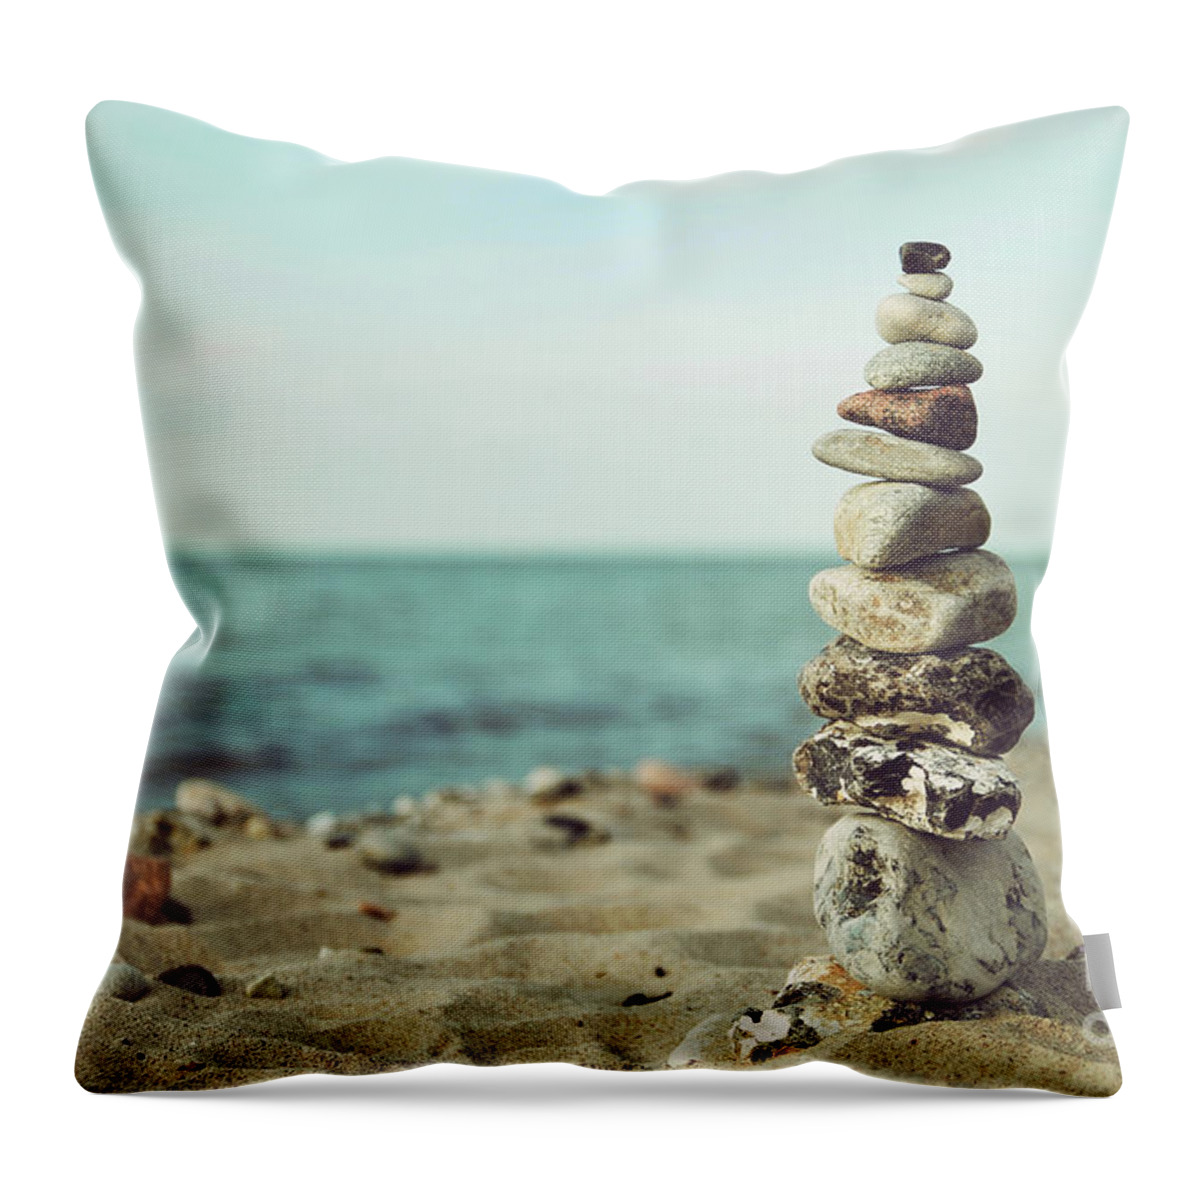 Stones Throw Pillow featuring the photograph Poised by Hannes Cmarits